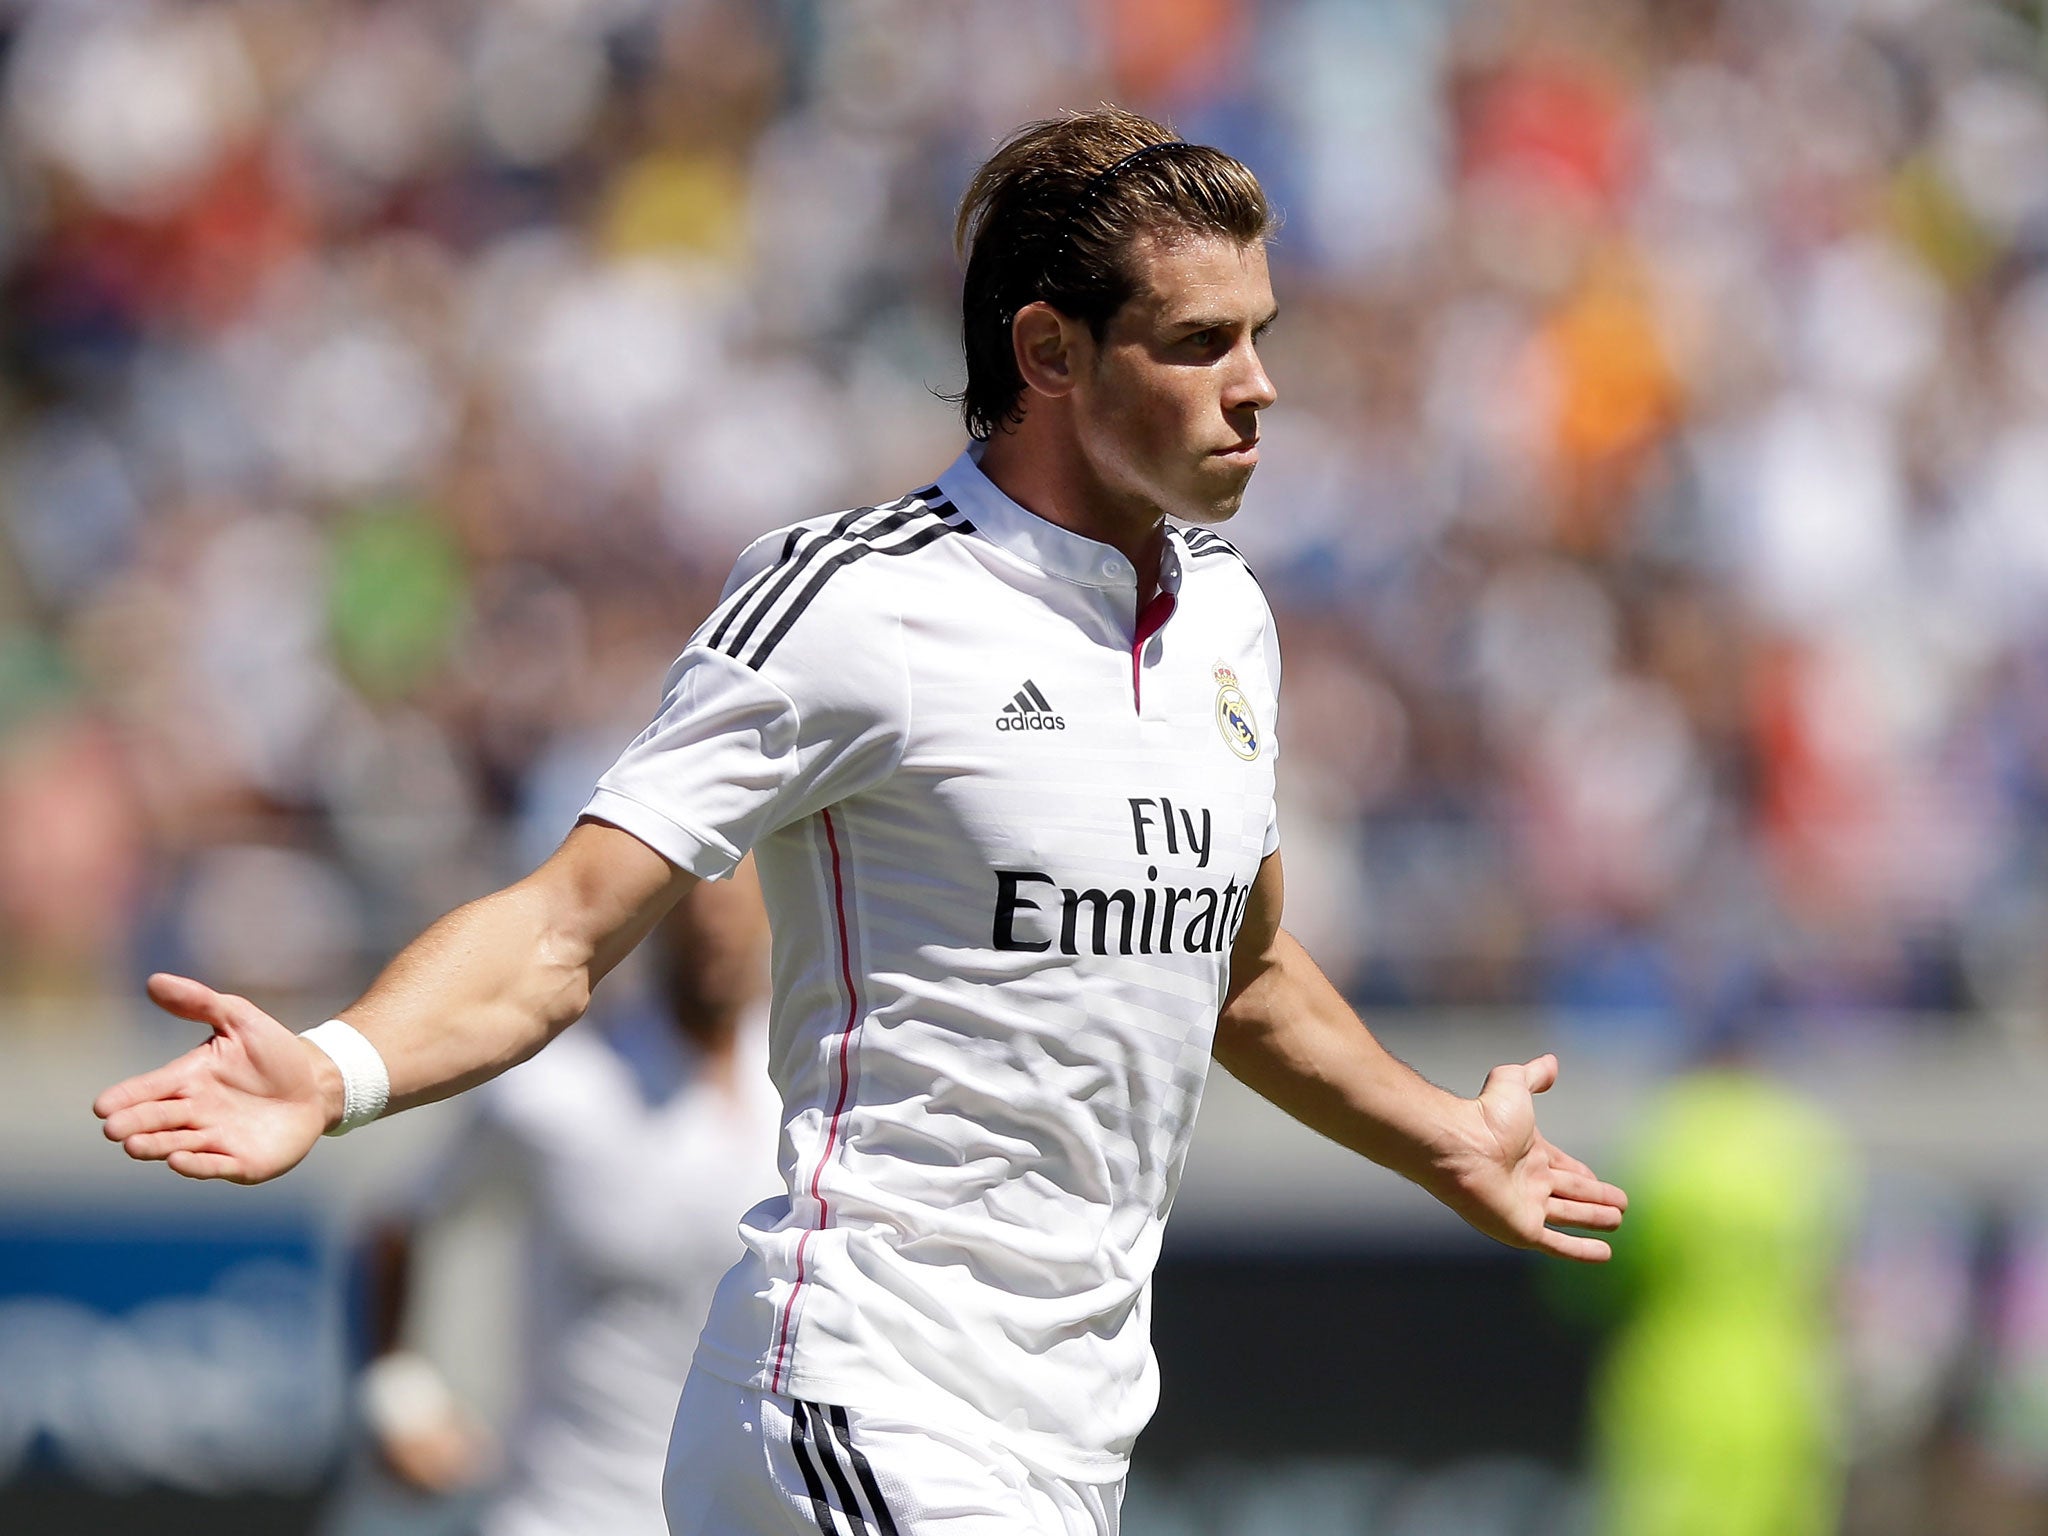 Gareth Bale pictured in Los Angeles last week wearing the alice band